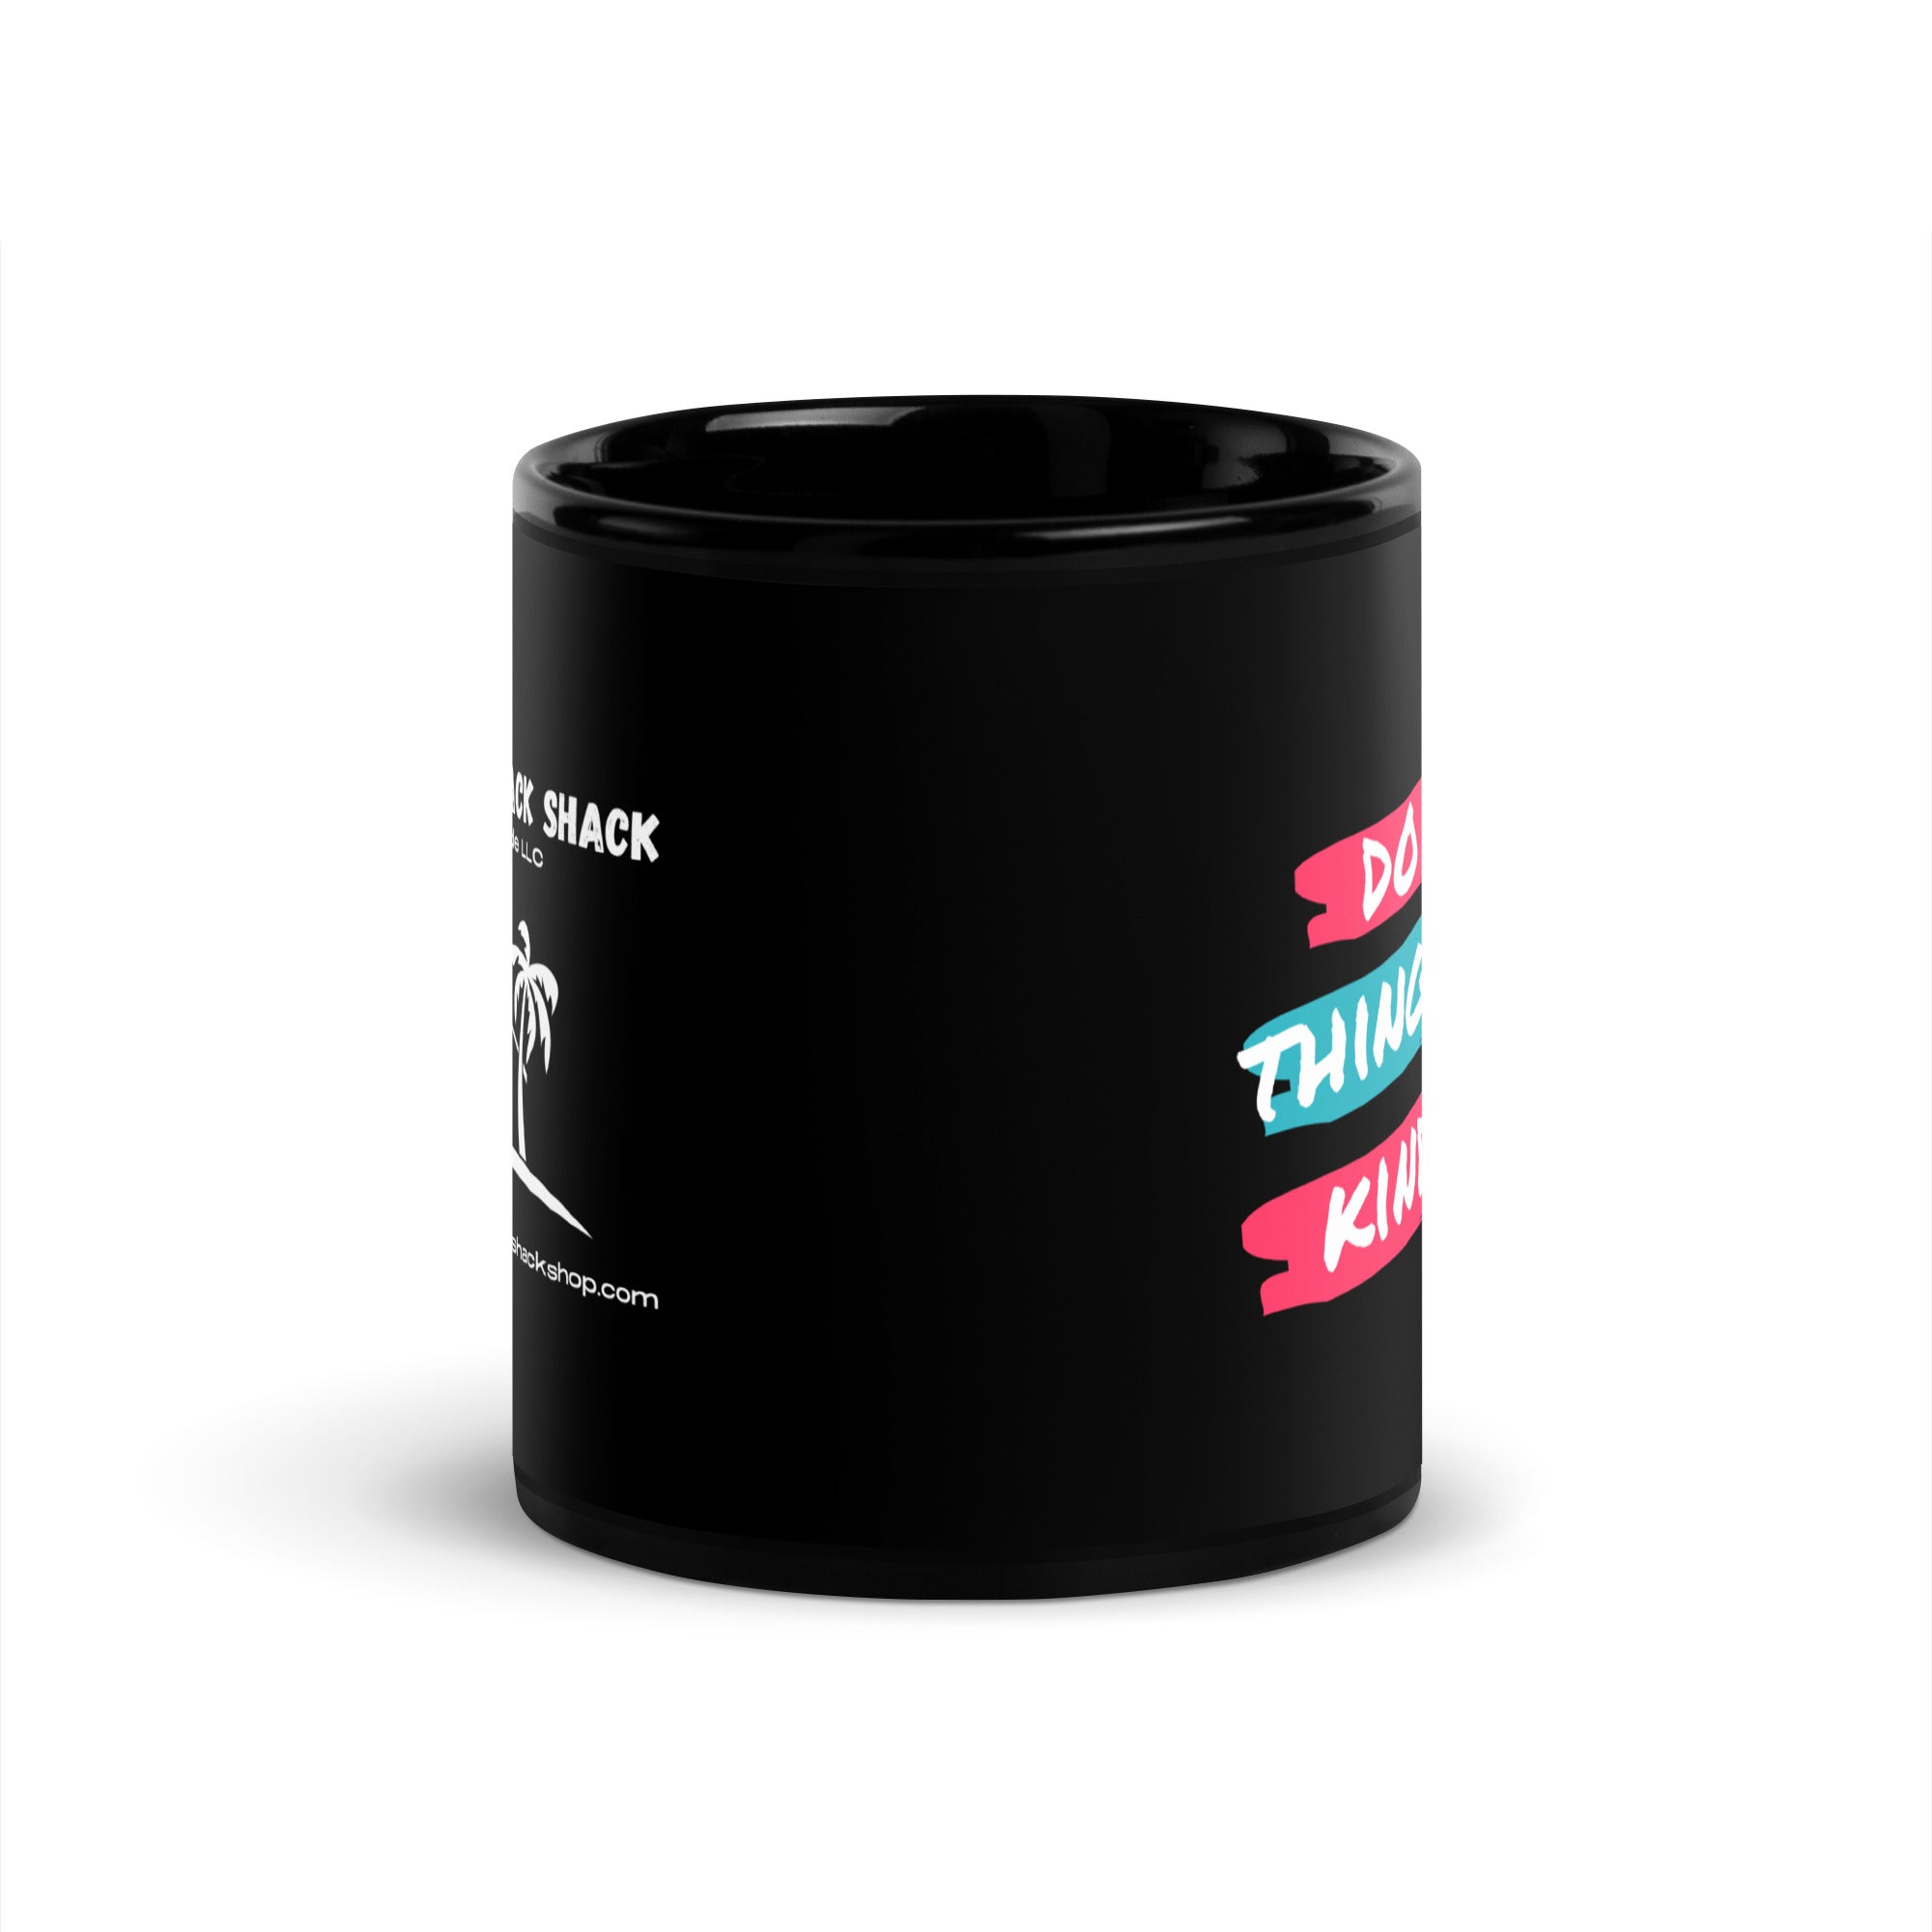 Black Glossy Mug - Do All Things With Kindness (L-Handed)